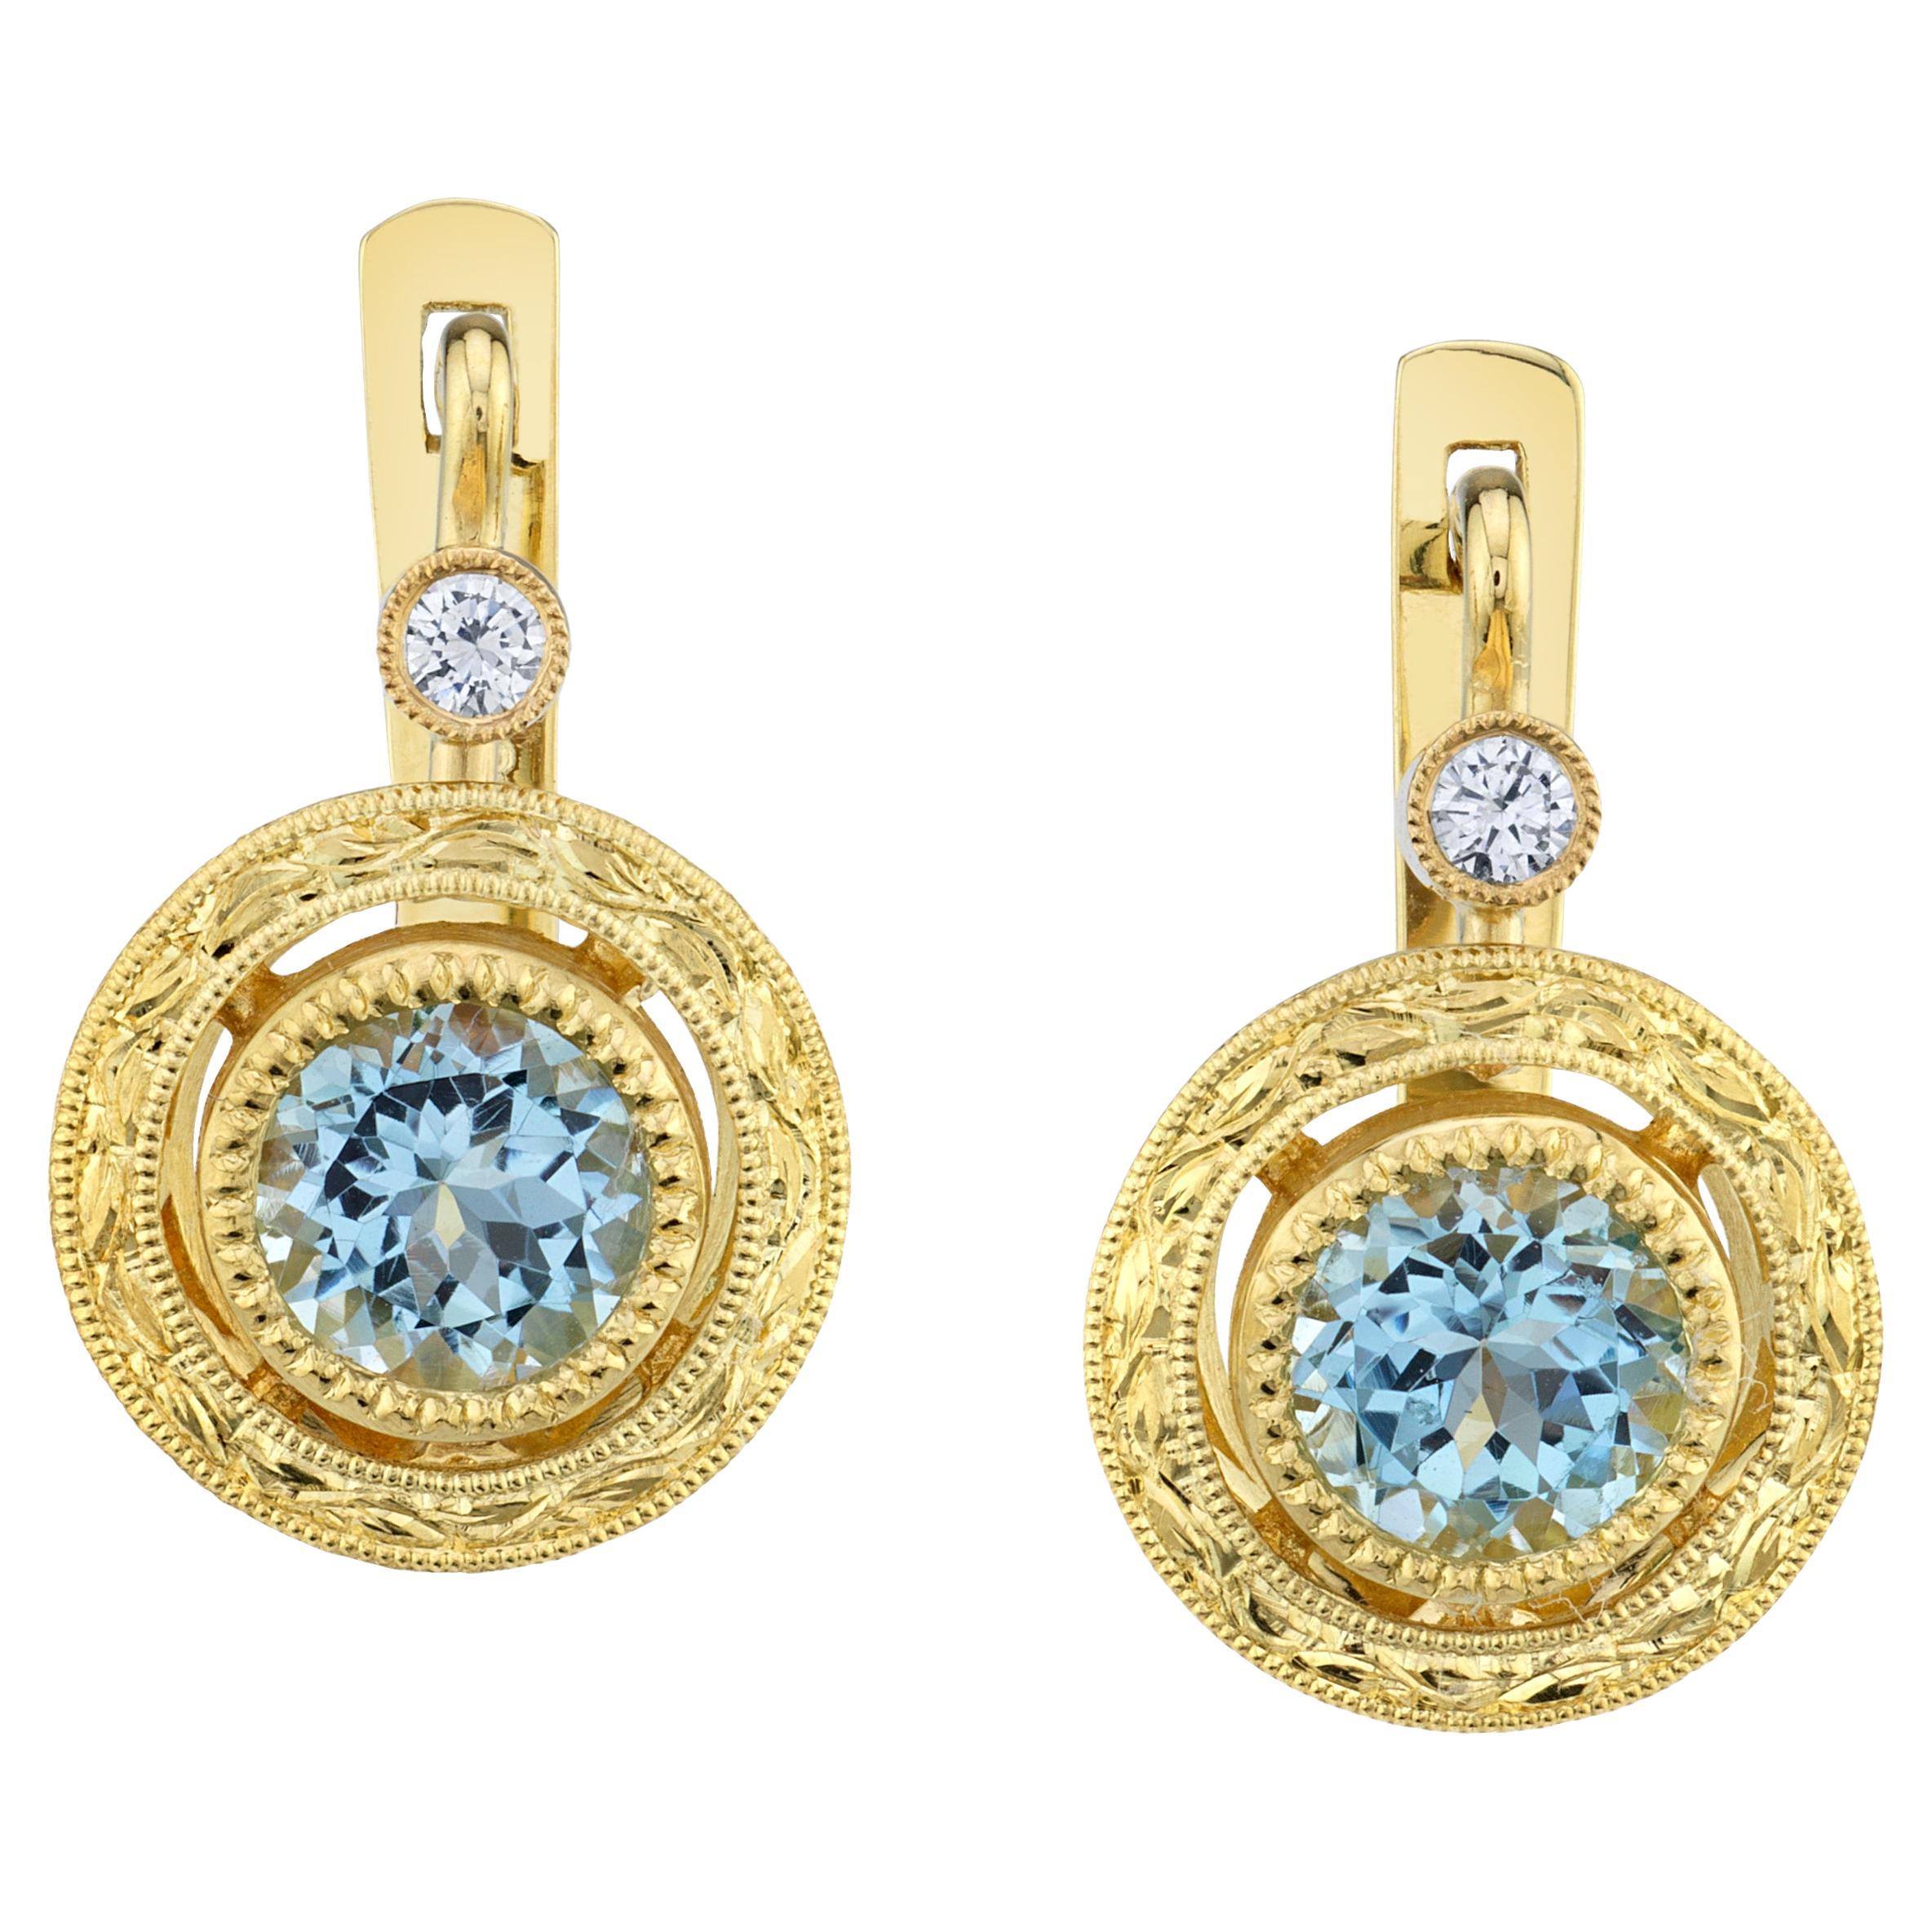 Aquamarine and Diamond Drop Earrings in Yellow Gold Bezels with Clip Backs